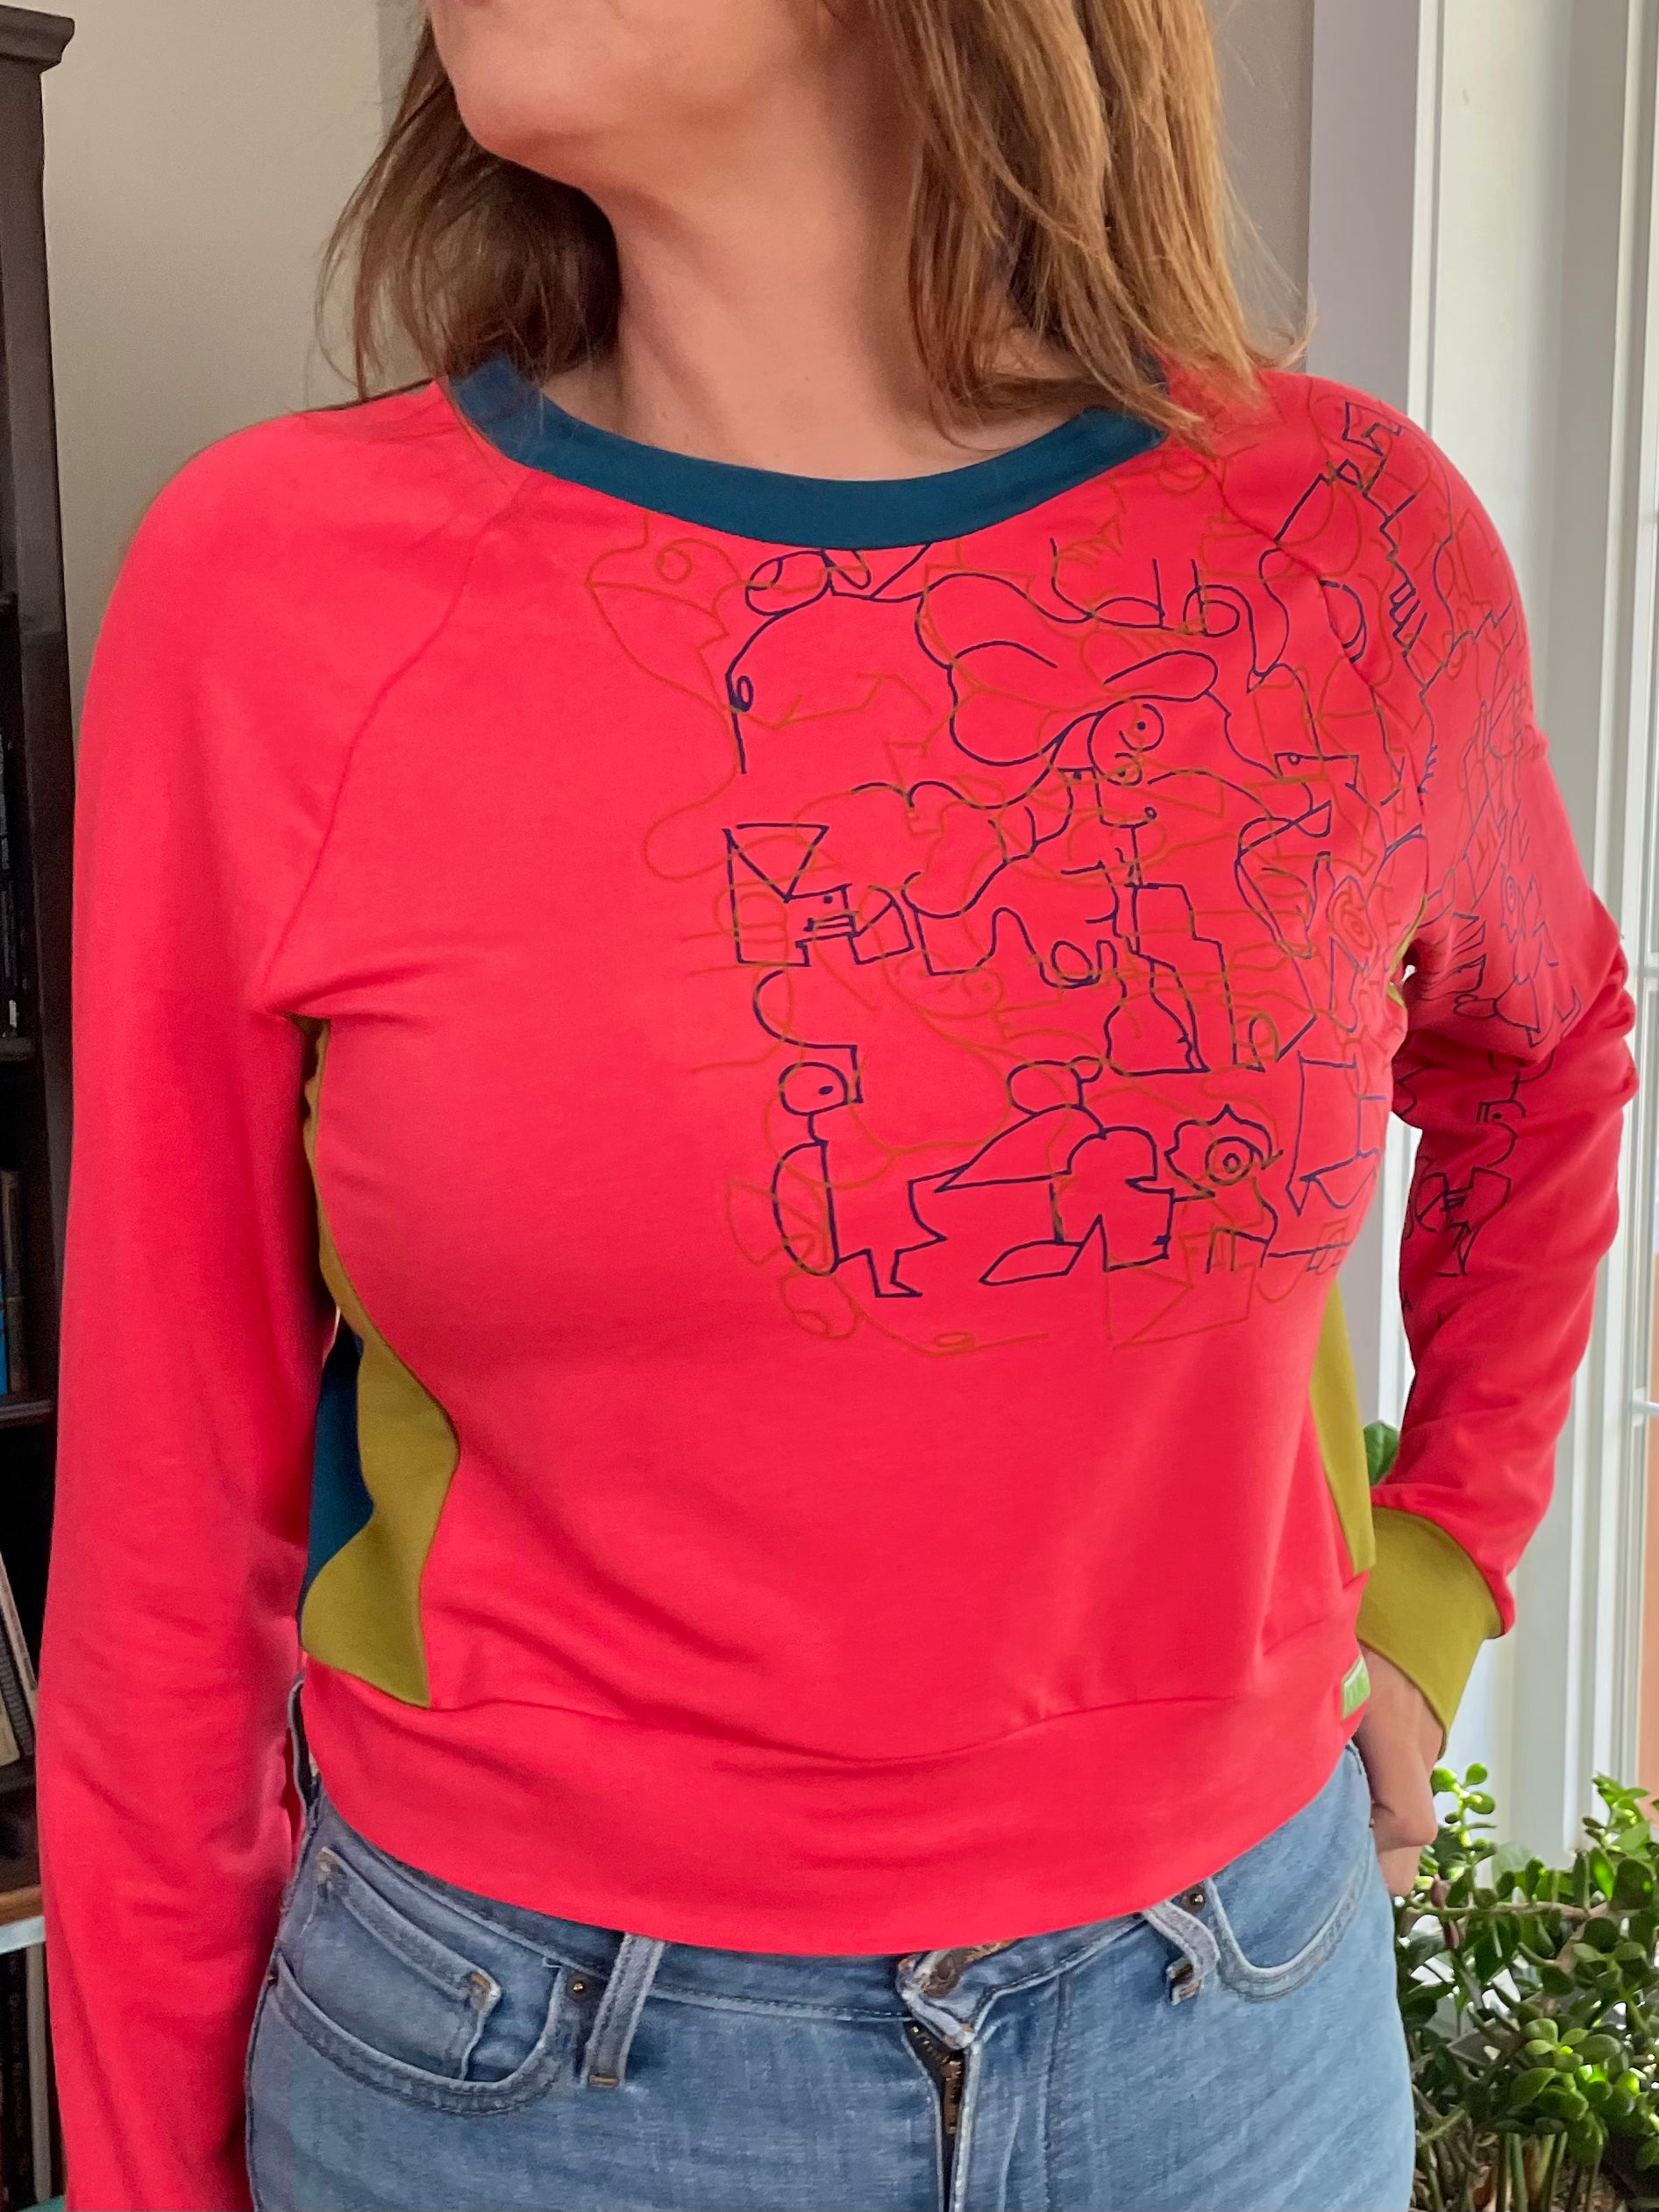 Hot Pink with Chartreuse/Teal Pullover